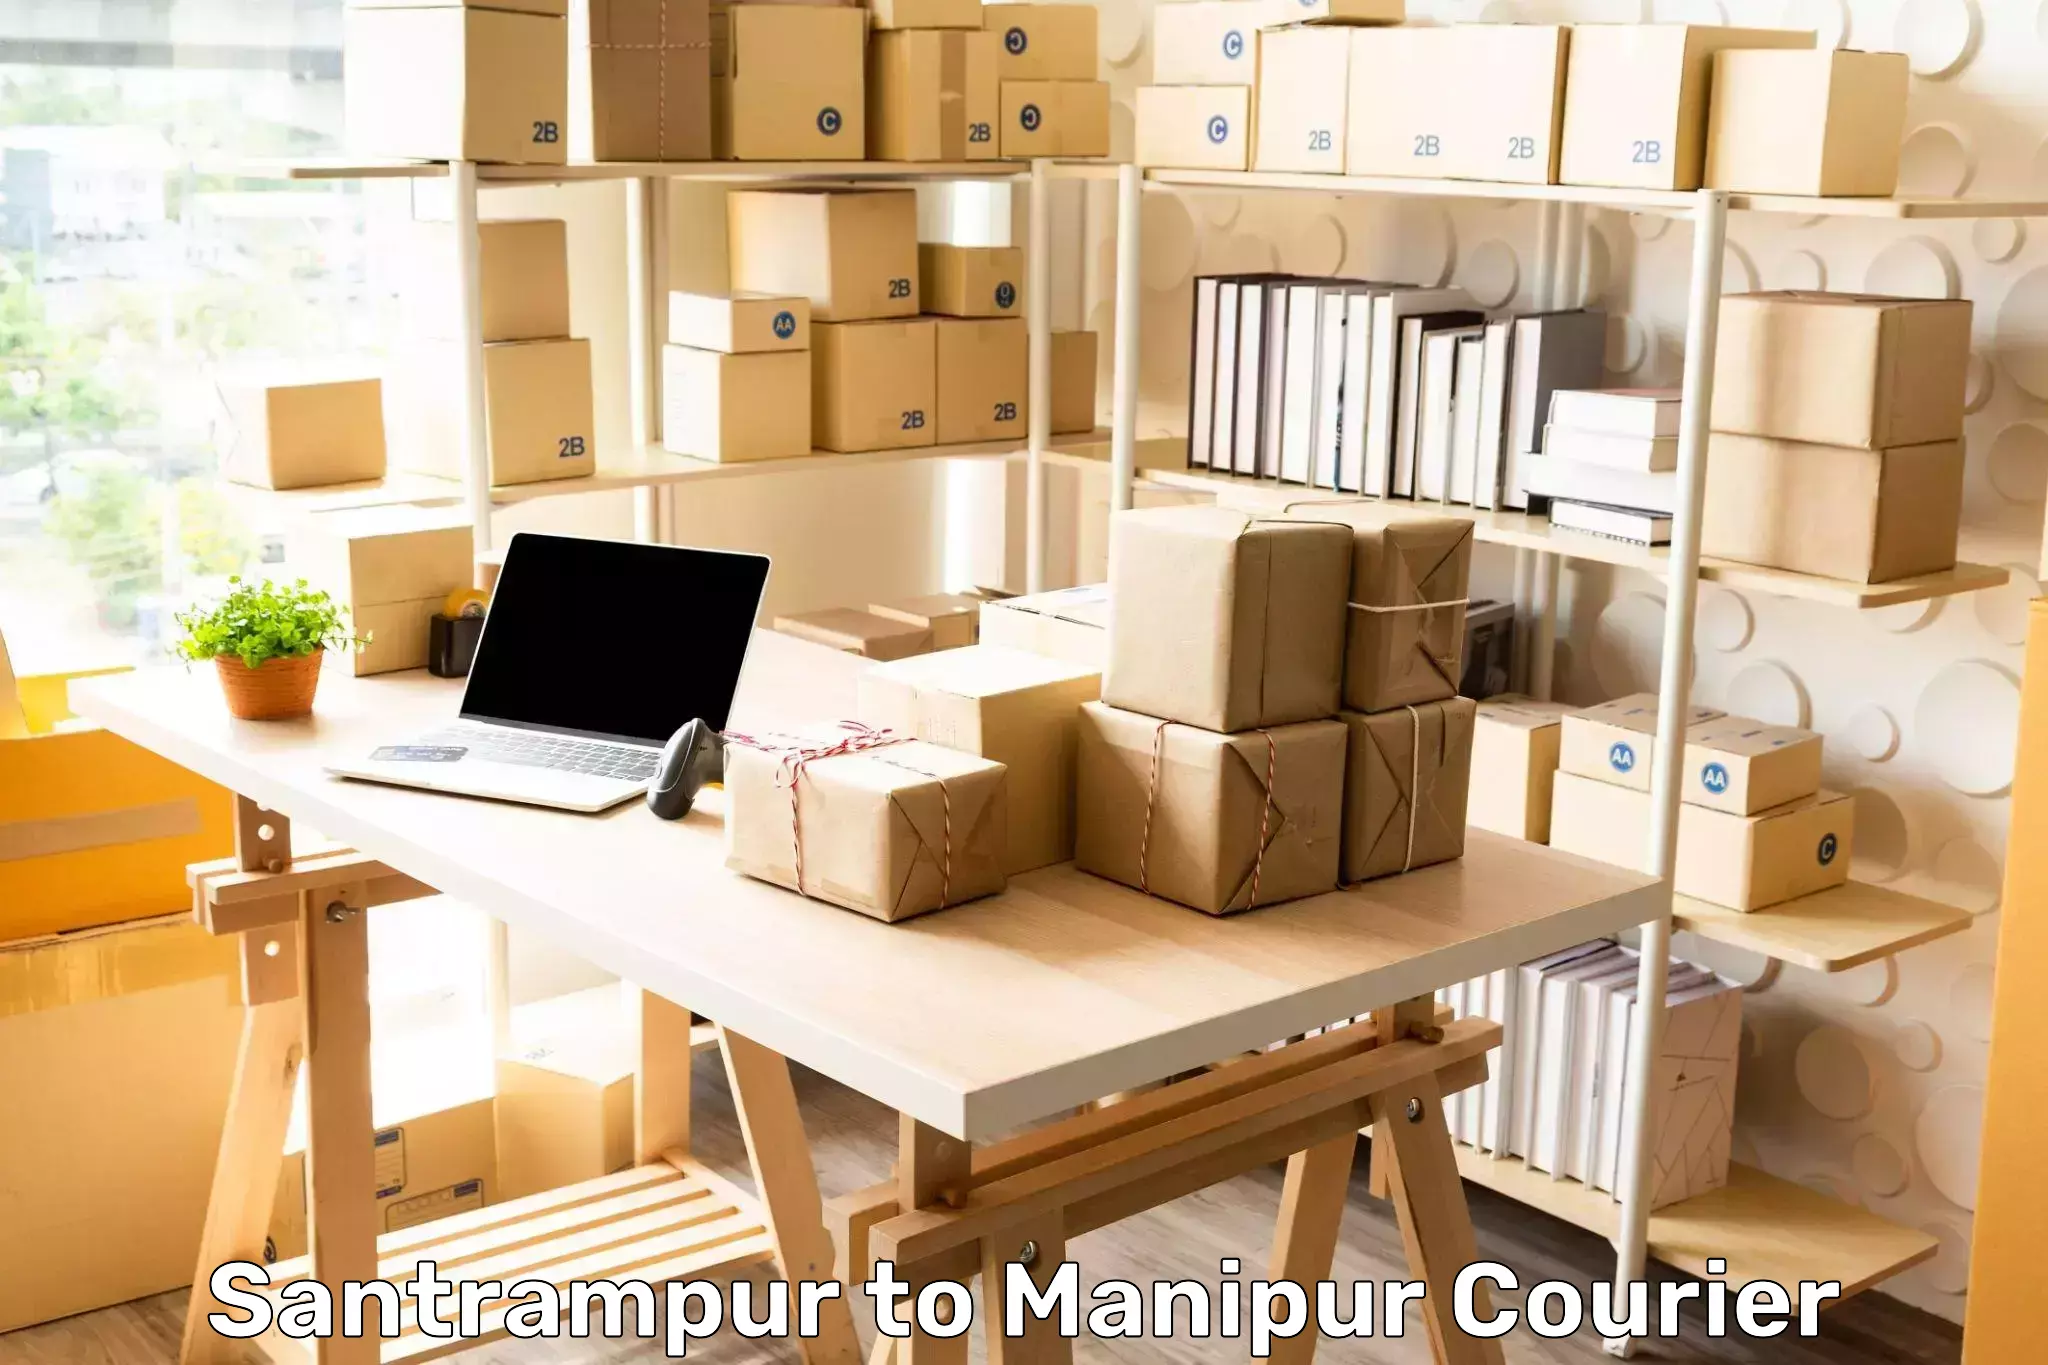 Reliable courier services in Santrampur to Chandel